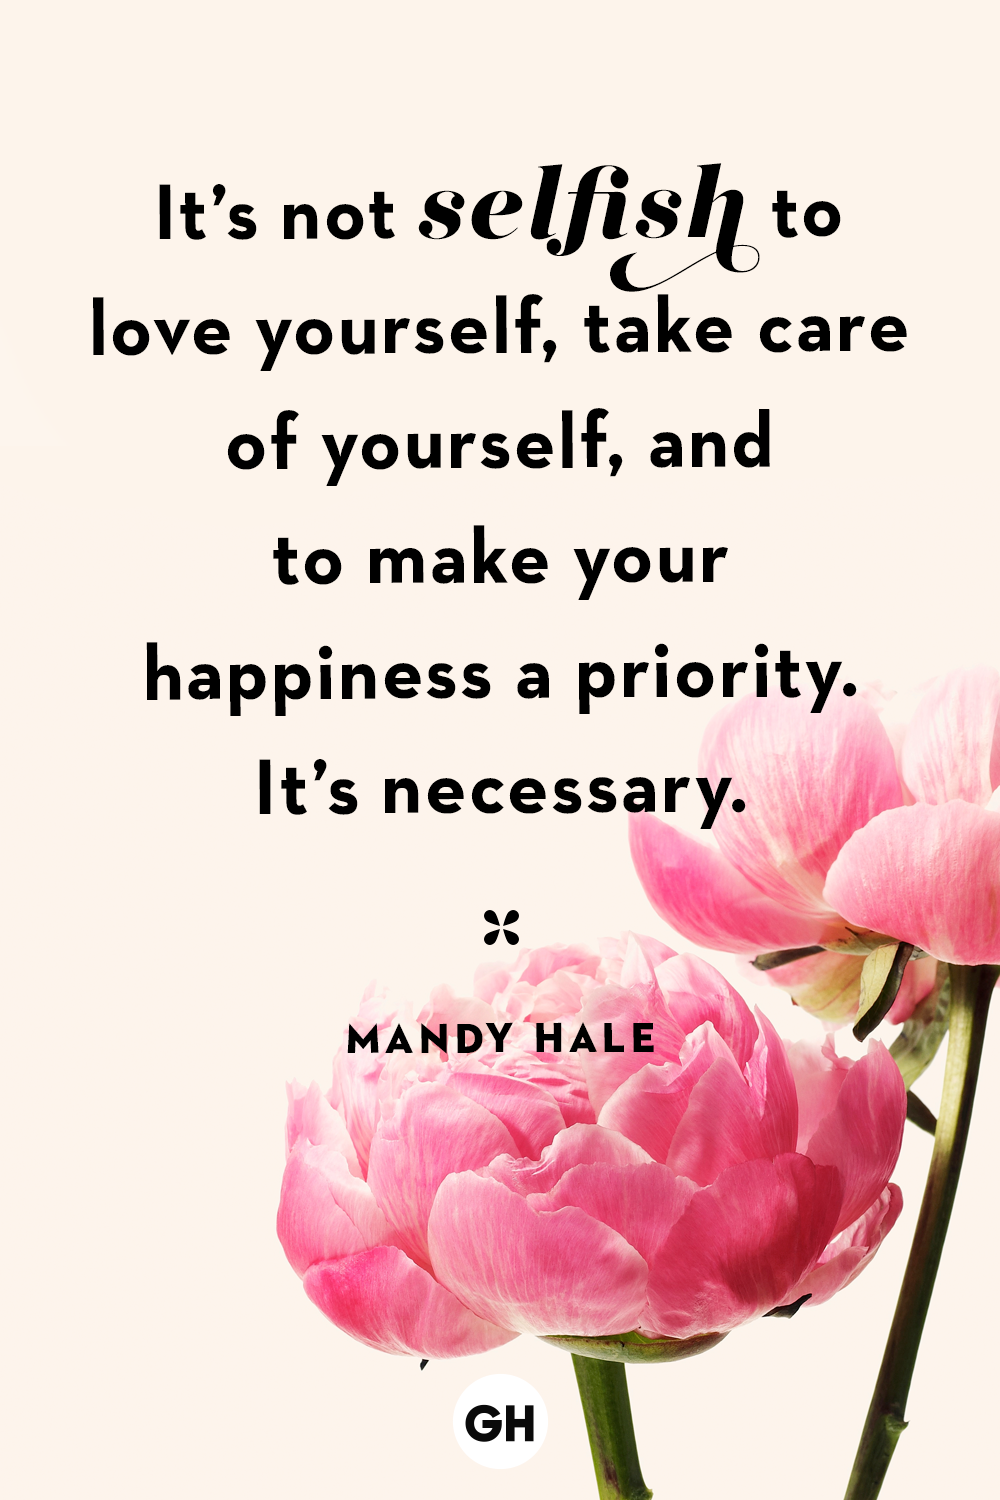 Love And Take Care Of Yourself Quotes - KibrisPDR